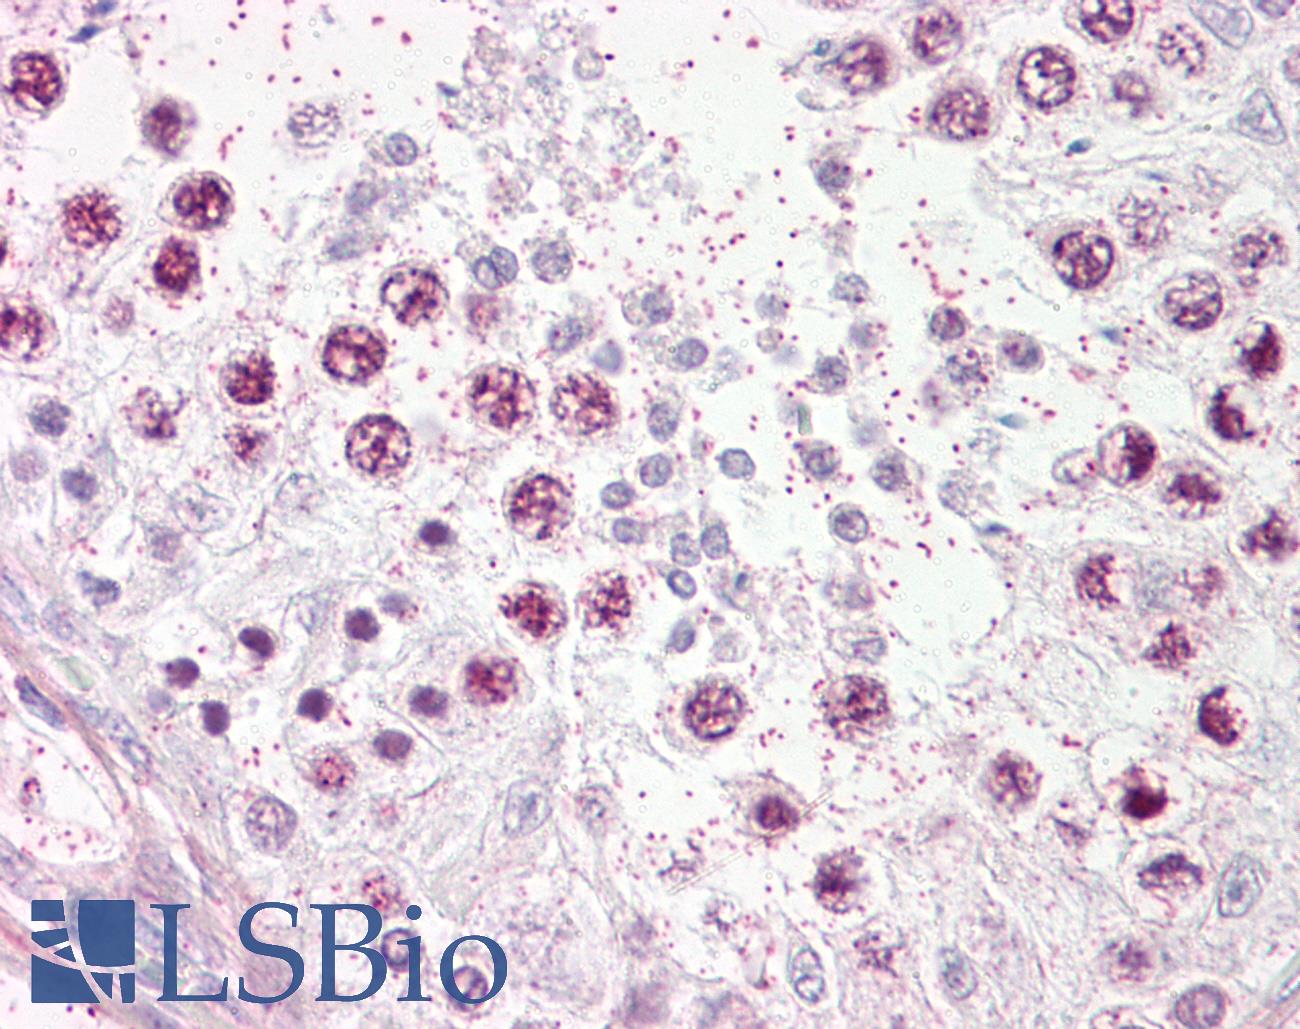 TOP2A / Topoisomerase II Alpha Antibody - Anti-TOP2A antibody IHC of human testis. Immunohistochemistry of formalin-fixed, paraffin-embedded tissue after heat-induced antigen retrieval. Antibody dilution 1:100.